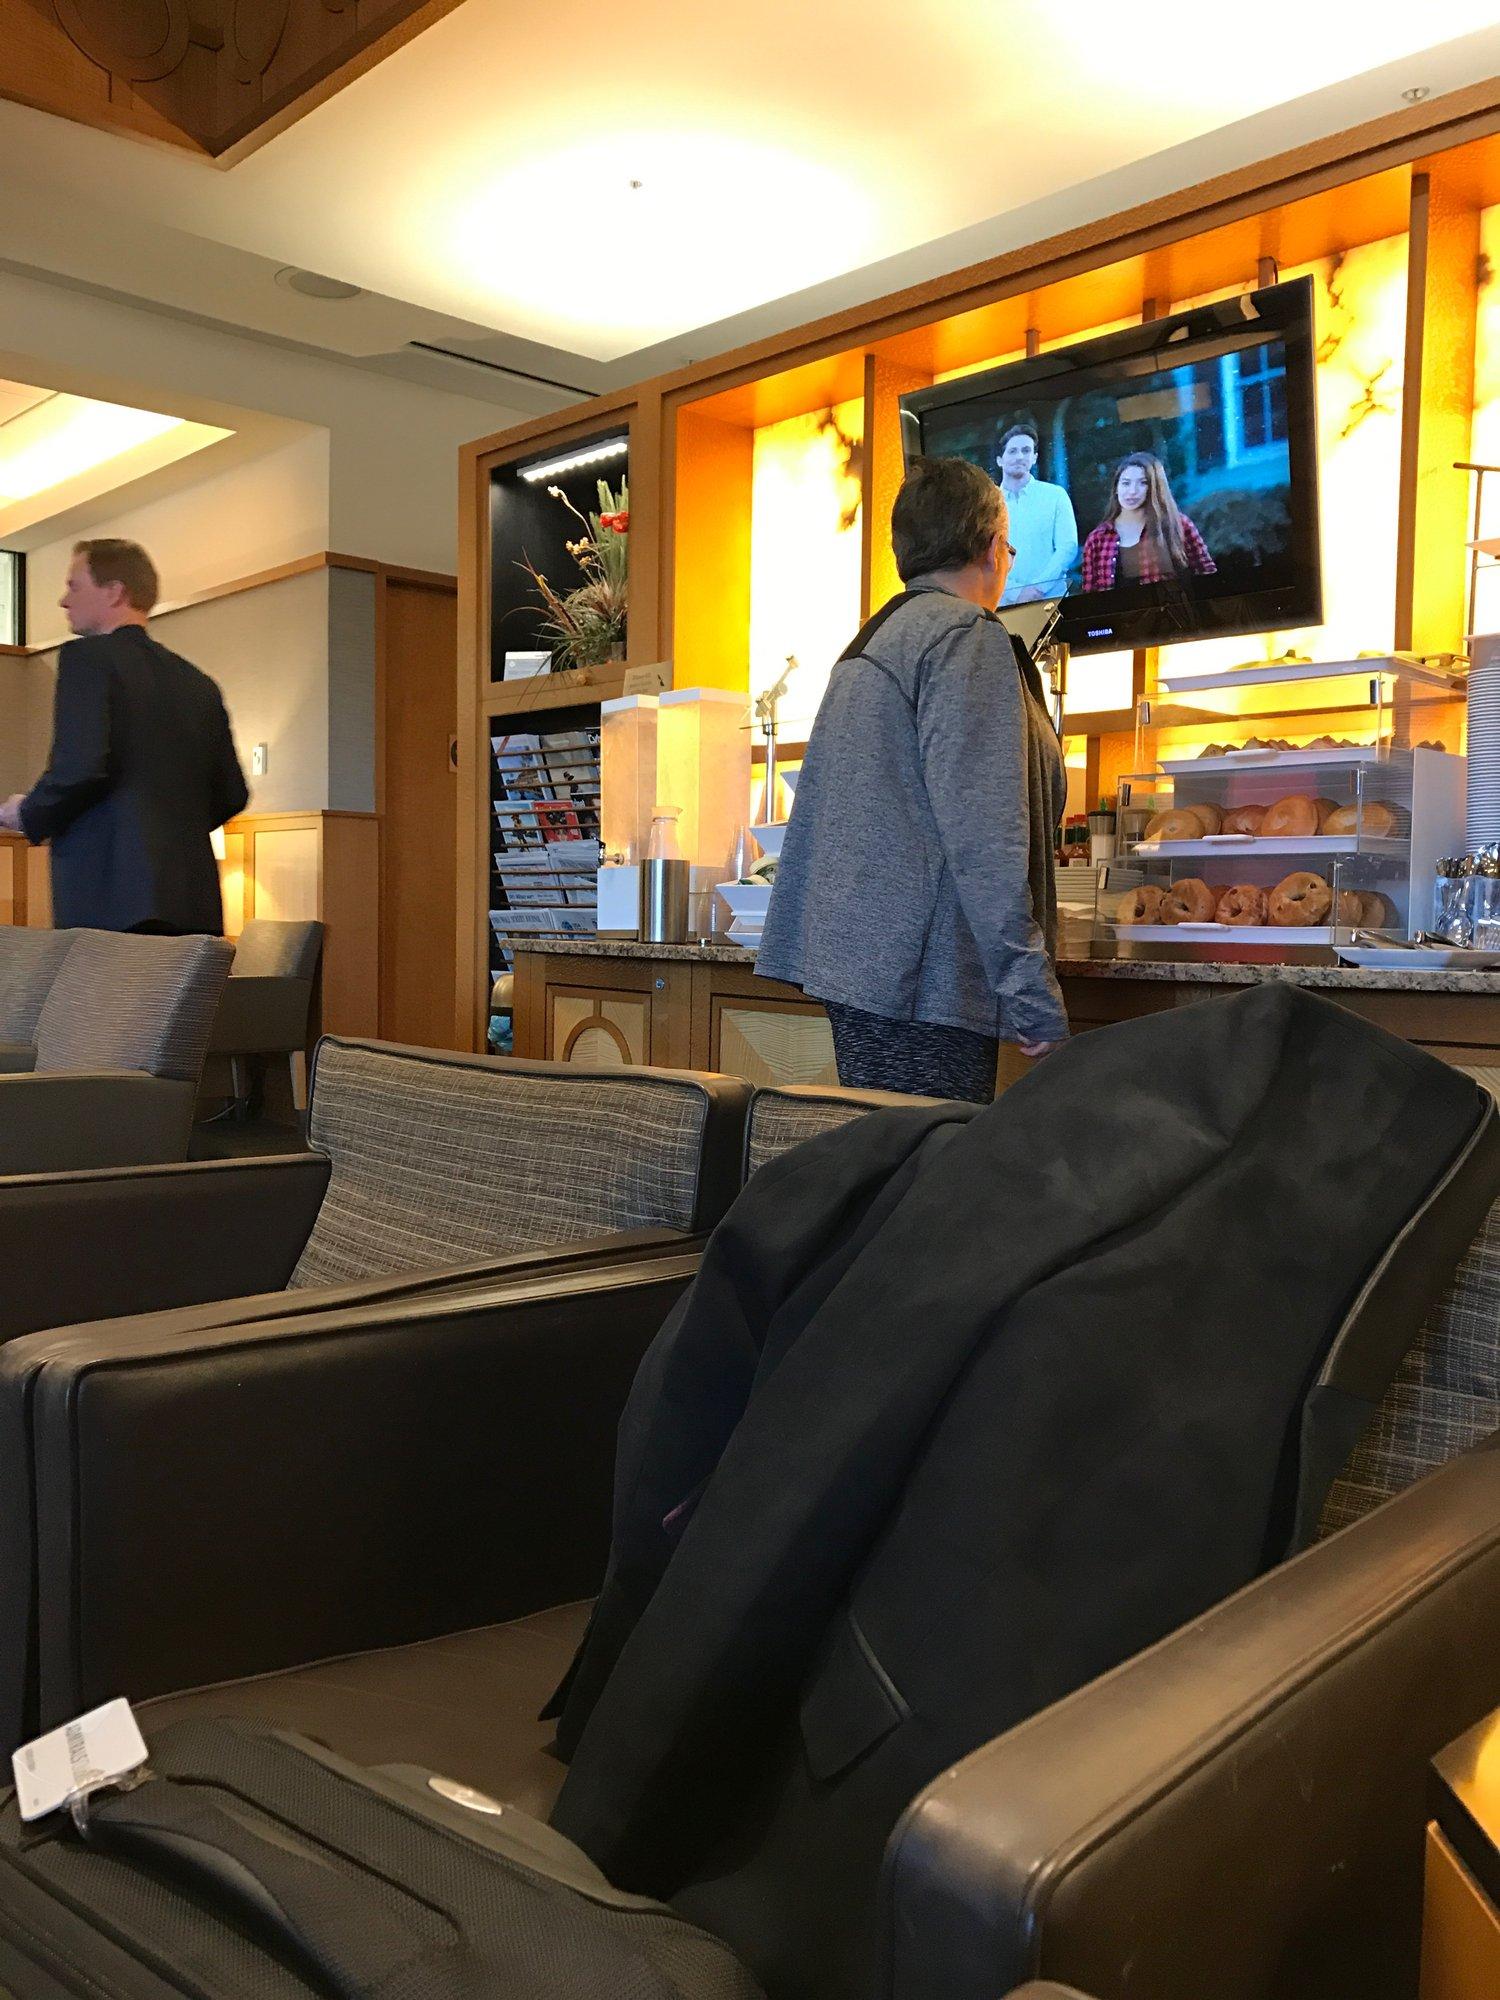 American Airlines Admirals Club image 7 of 7